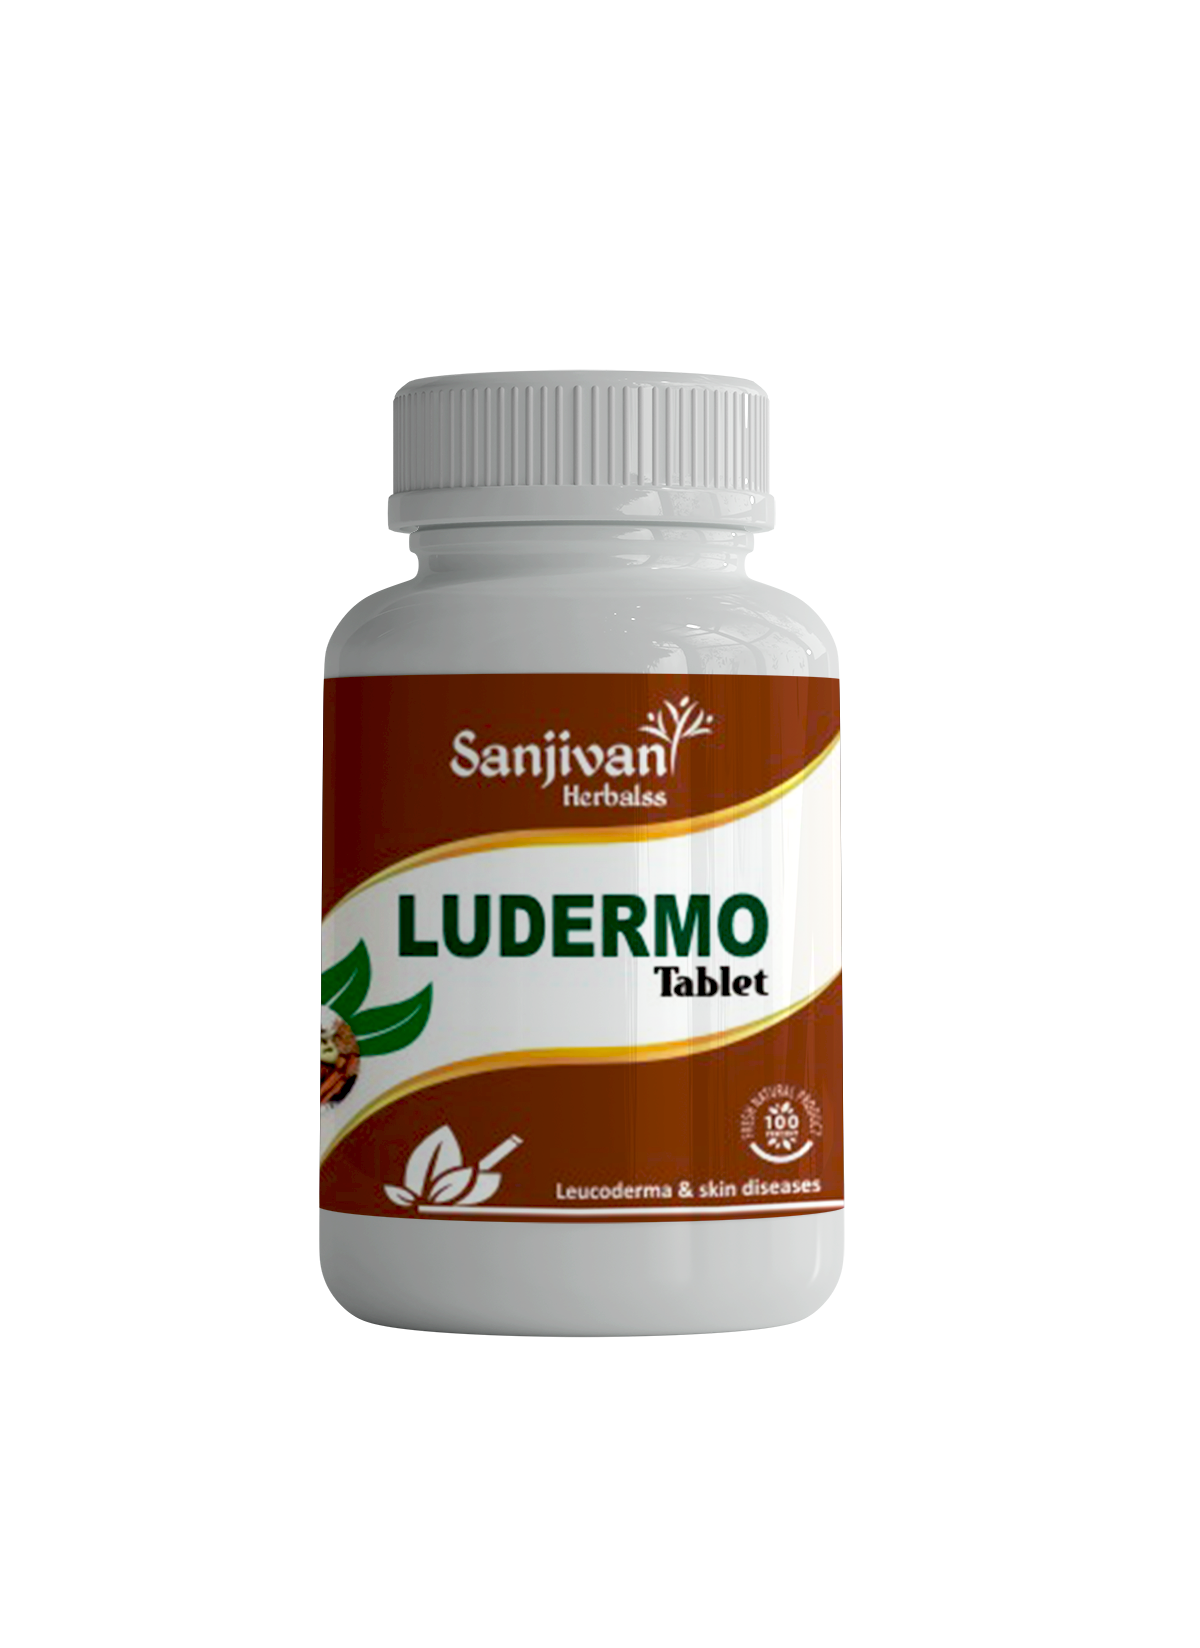 Ludermo Tablet